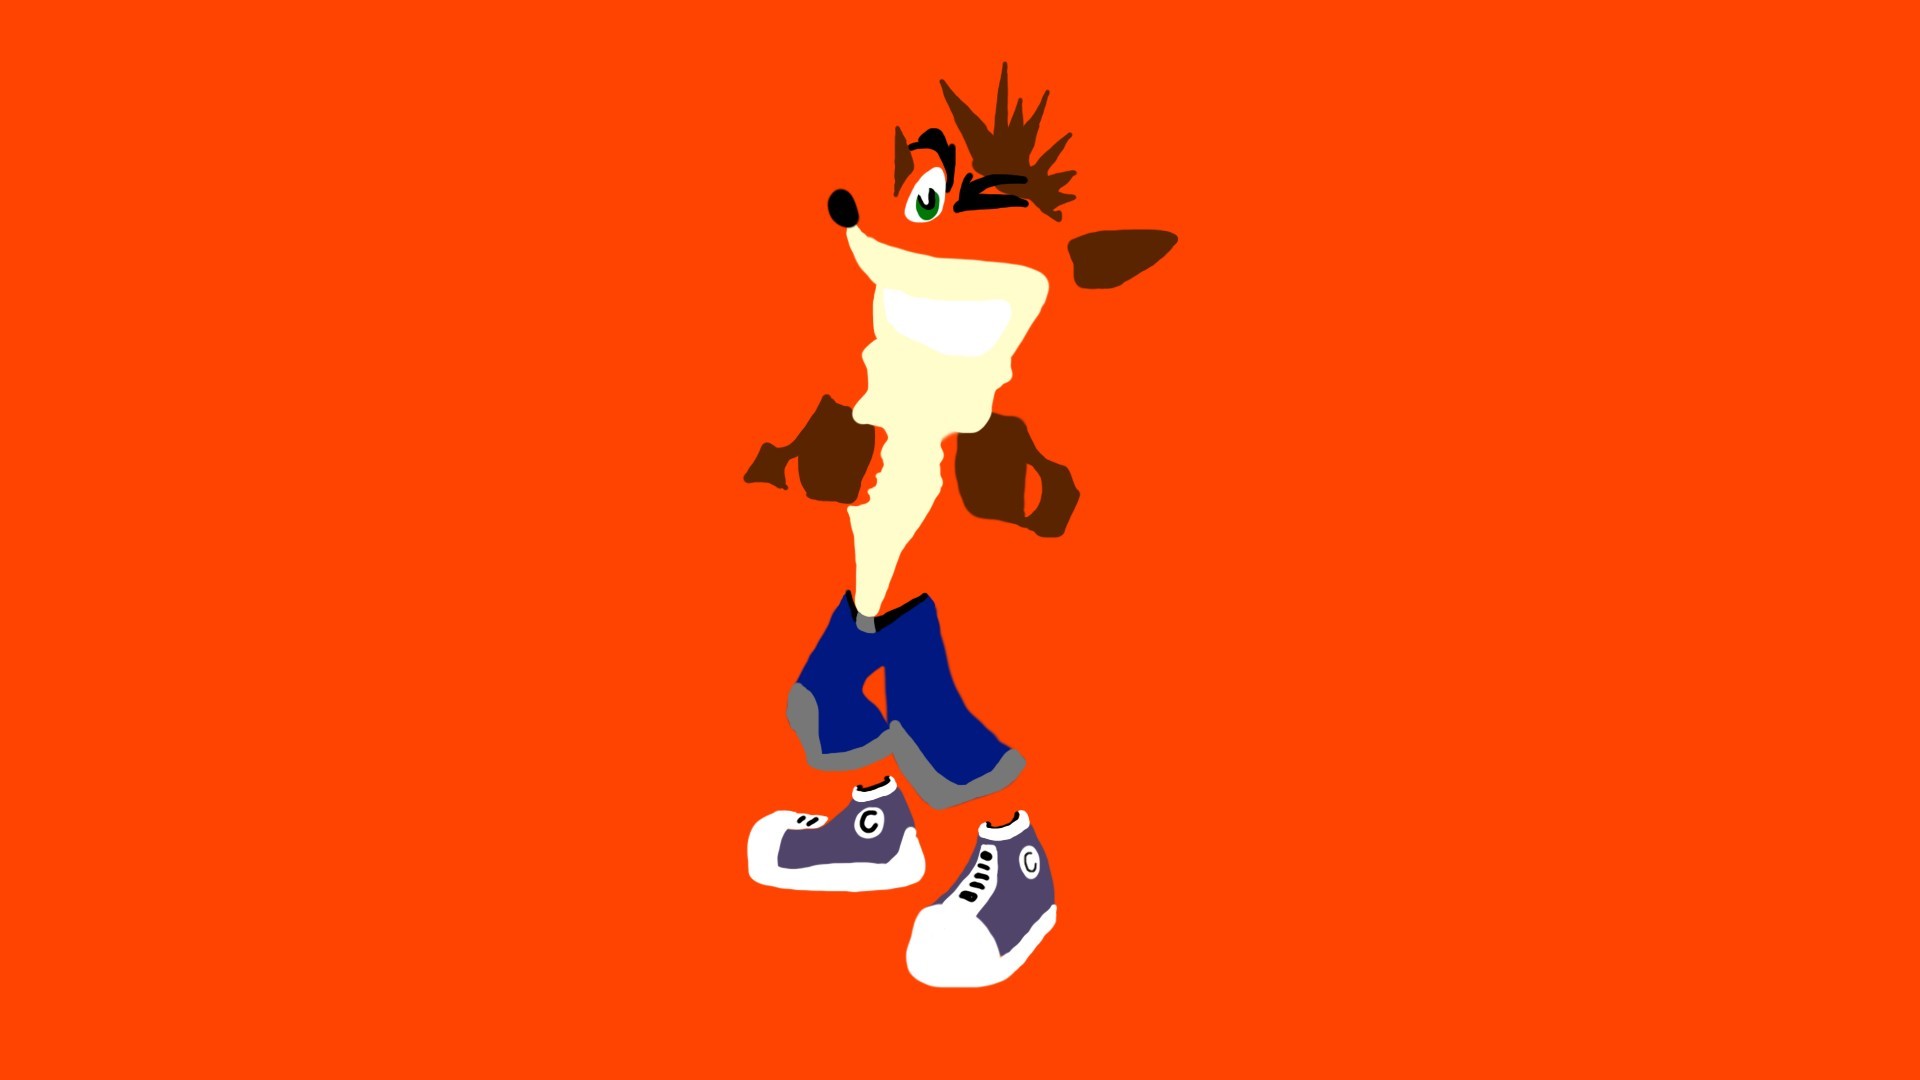 1920x1080  Collection of Crash Bandicoot Wallpaper on Spyder Wallpapers